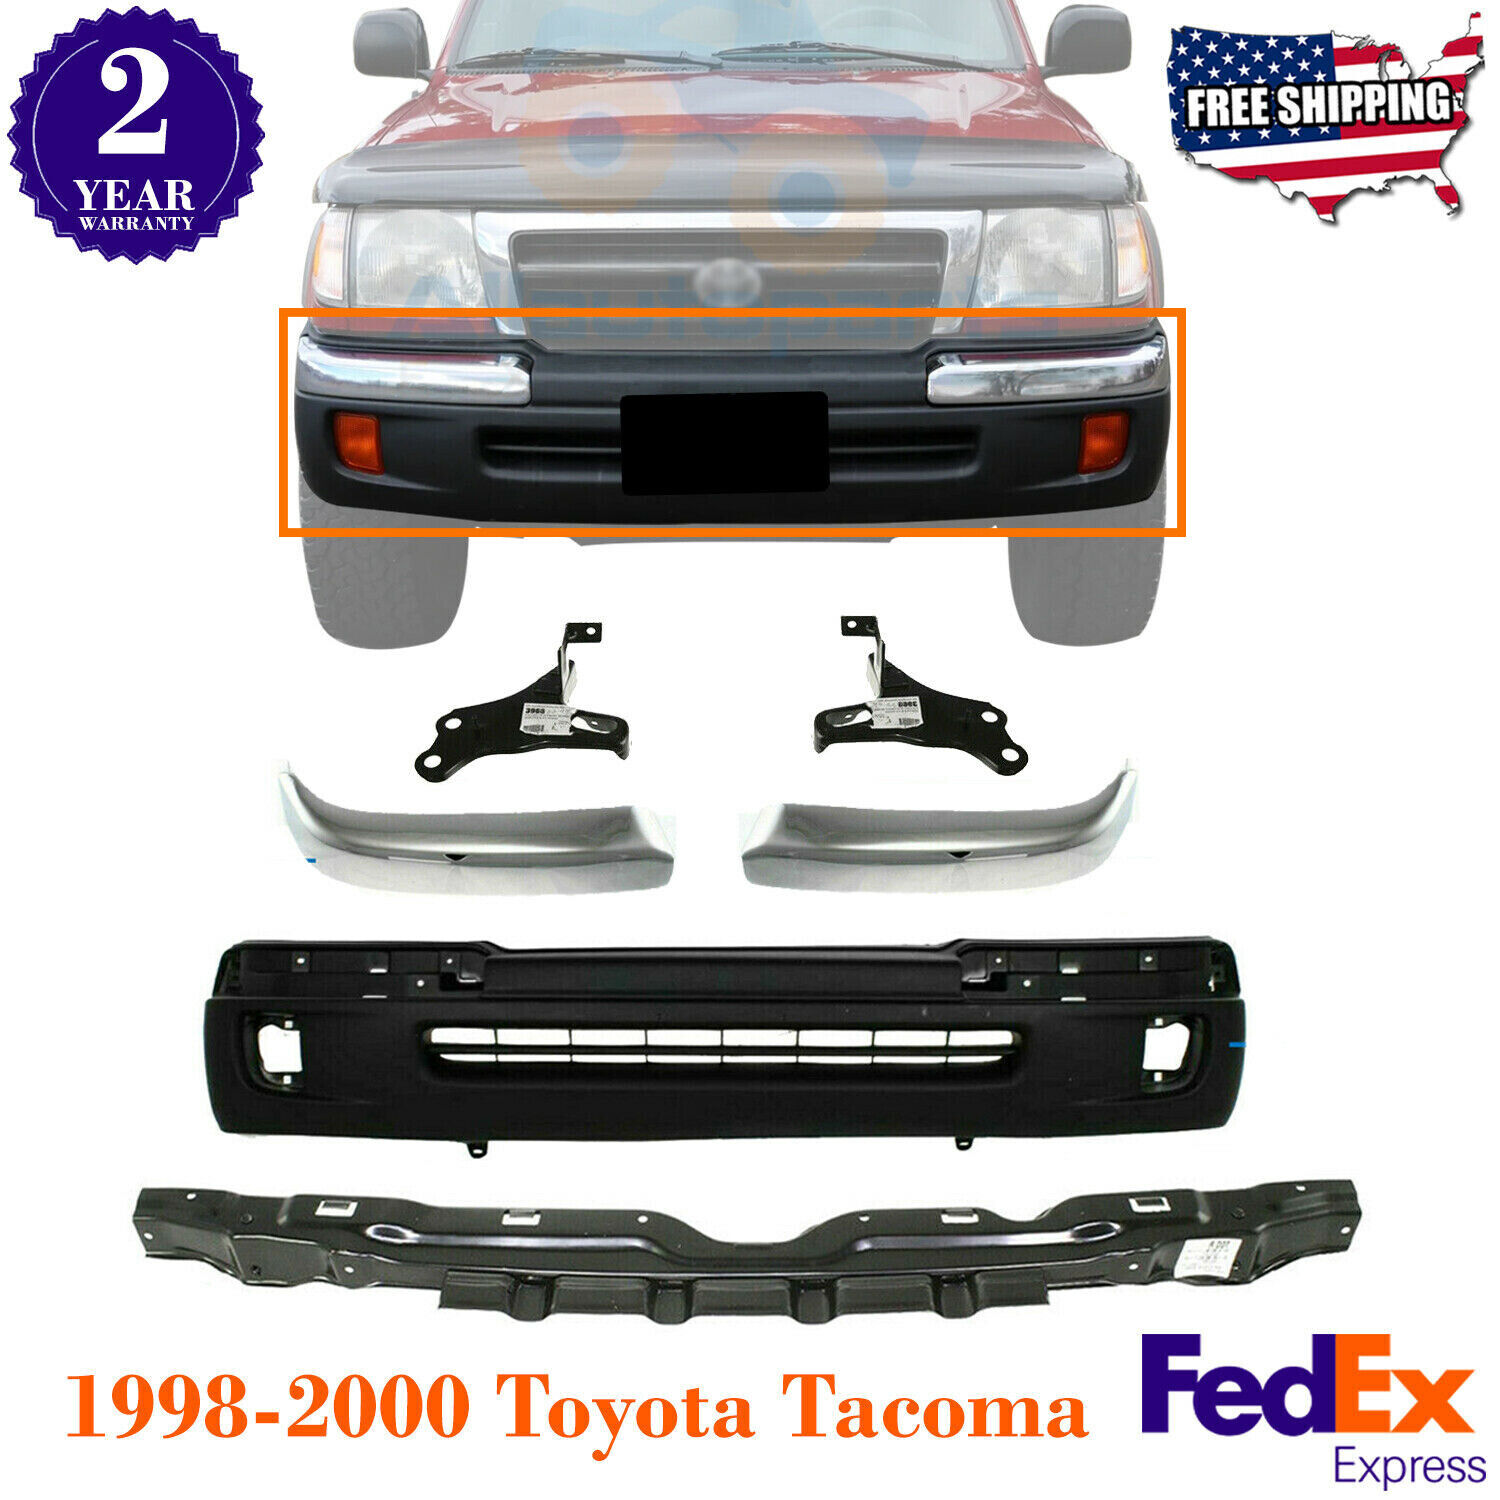 Front Bumper Kit + Brackets For 1998-2000 Toyota Tacoma